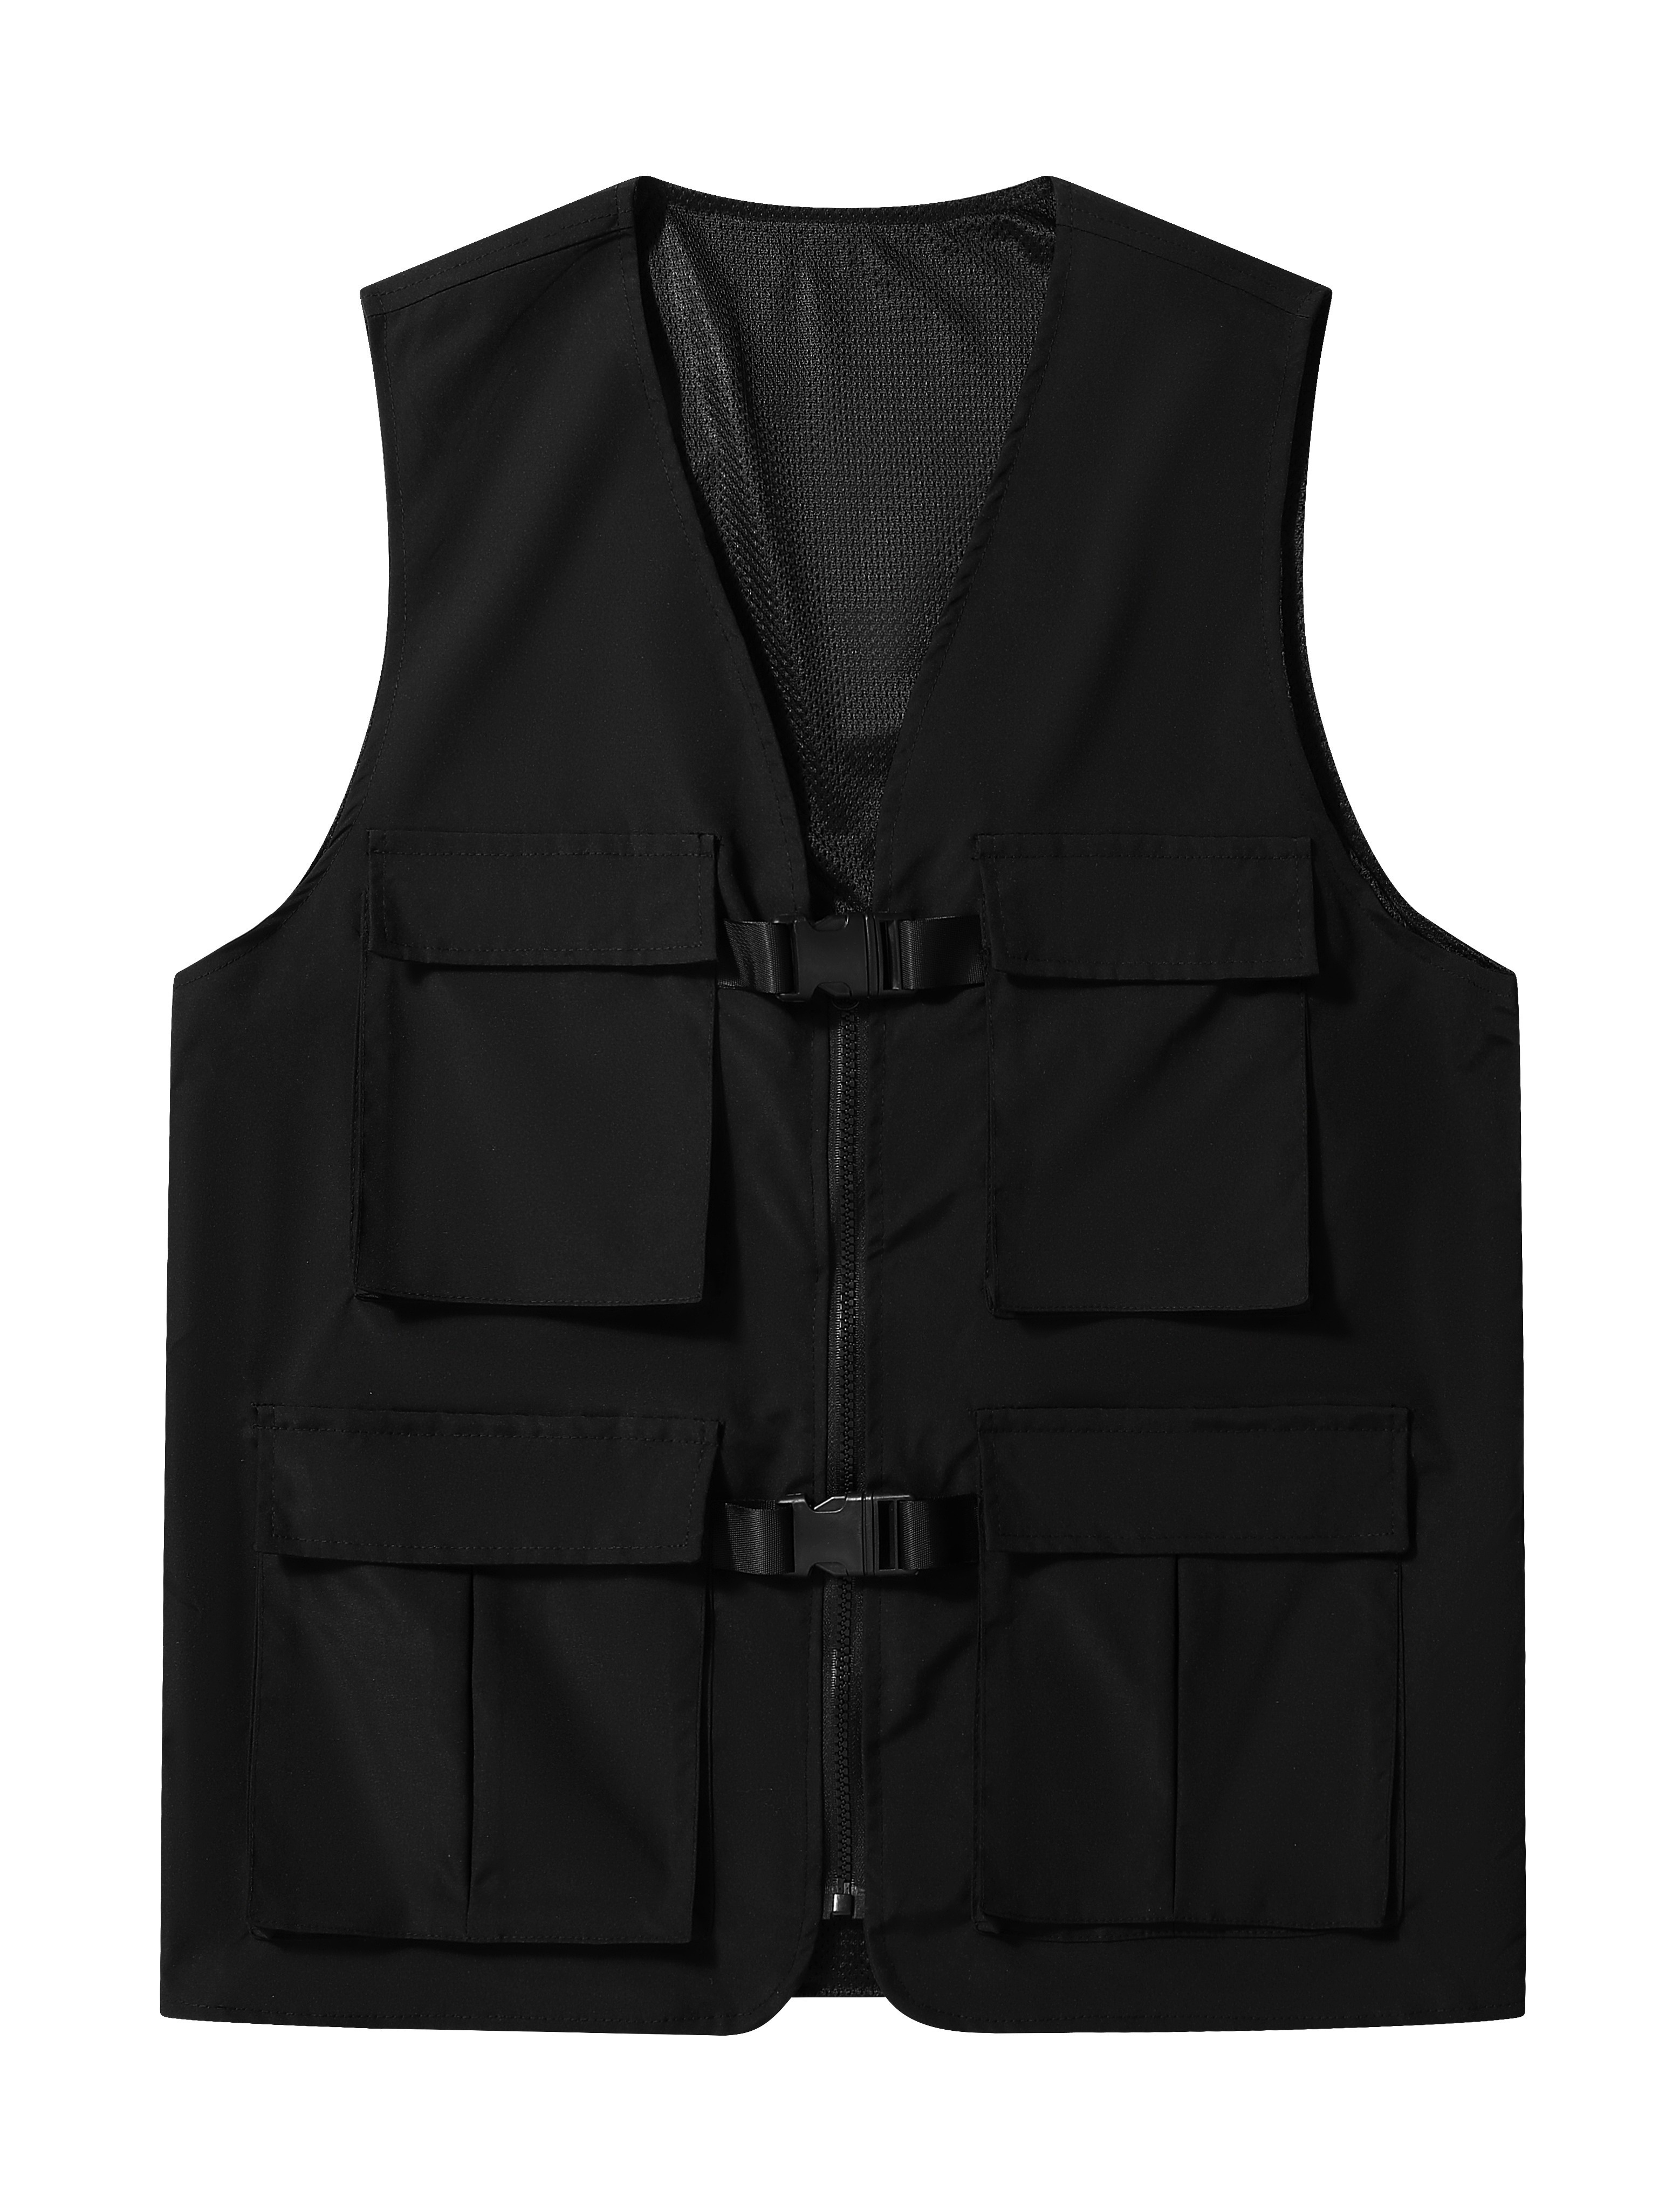 Plus Size Men's Trendy Zipper Cargo Vest Jacket With Buckles And Four  Pockets Men Casual Style Clothing